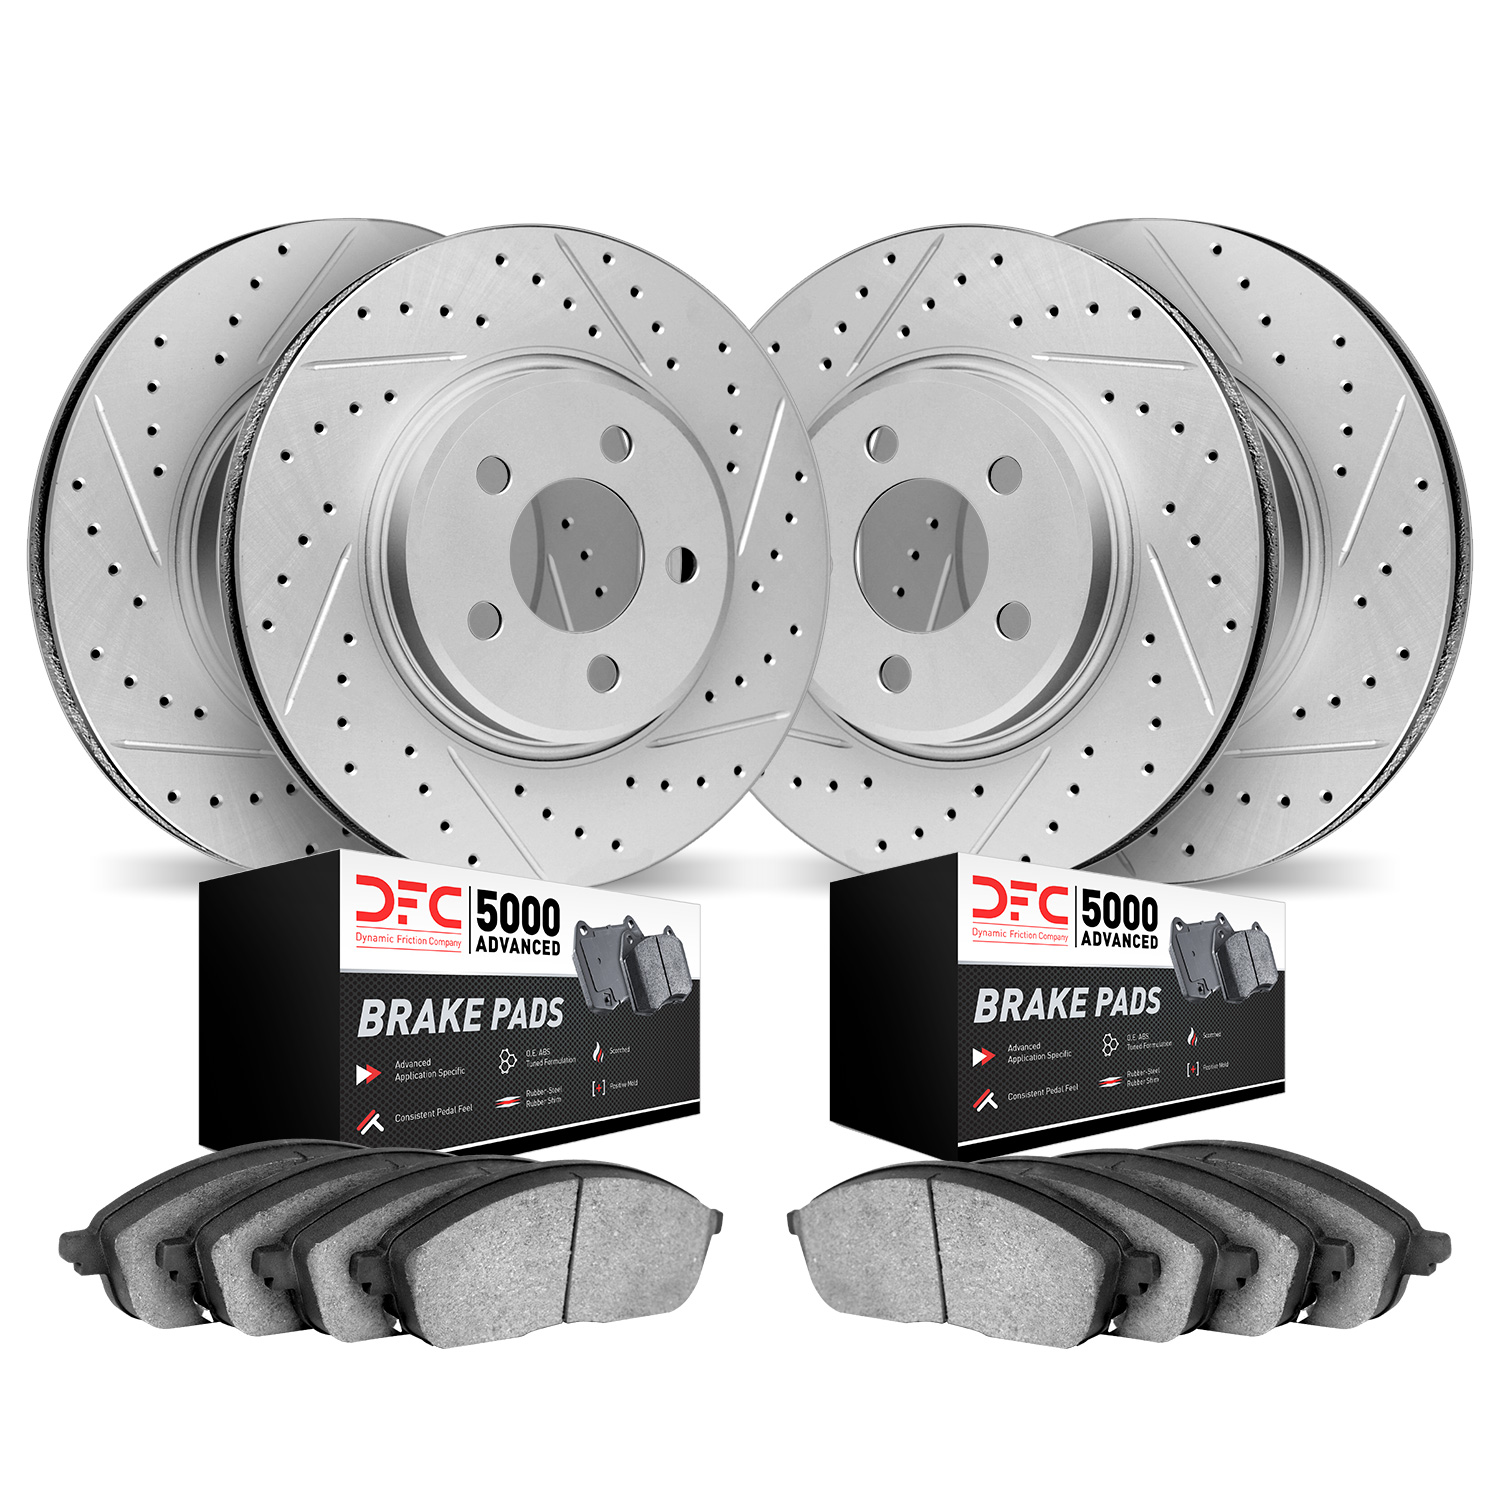 2504-31022 Geoperformance Drilled/Slotted Rotors w/5000 Advanced Brake Pads Kit, 2010-2015 BMW, Position: Front and Rear